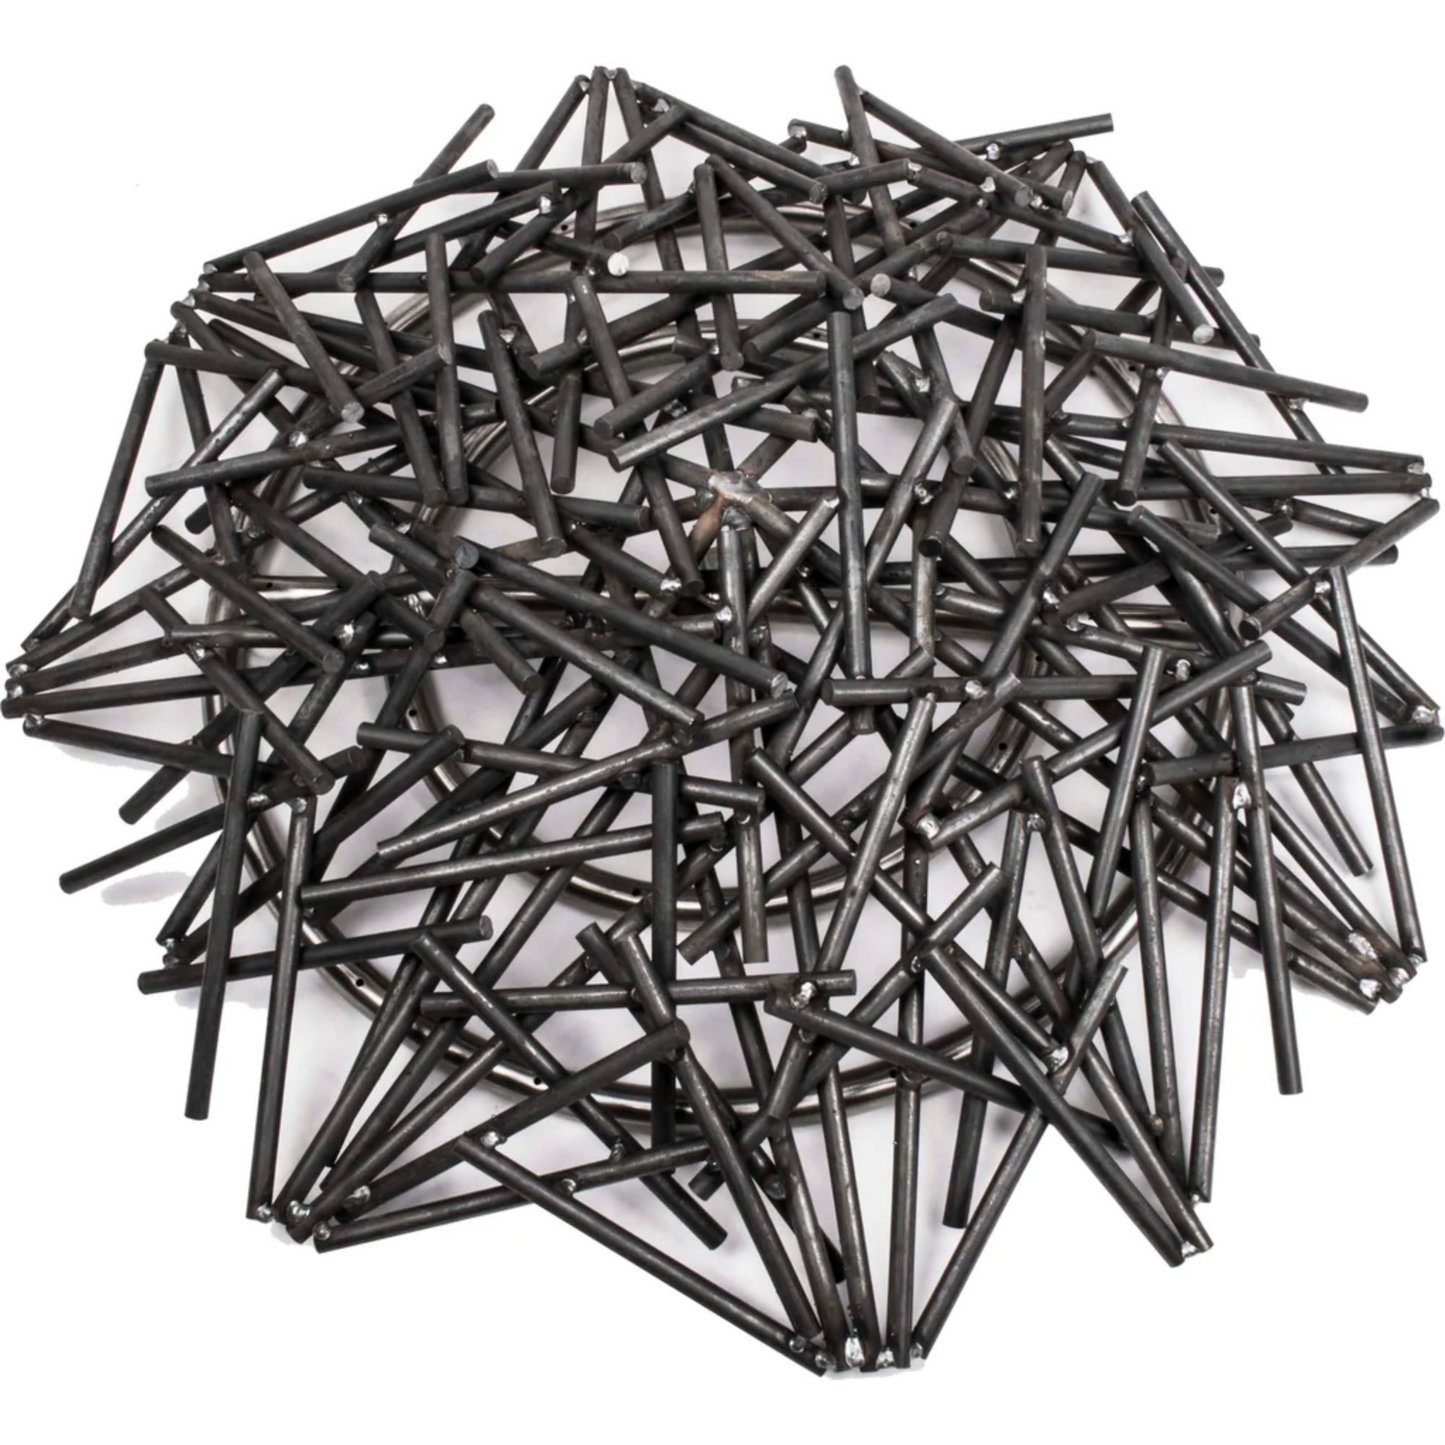 The Outdoor Plus 30" Milled Steel Bird's Nest with 24" Stainless Steel Round Burner | OPT-30BNS